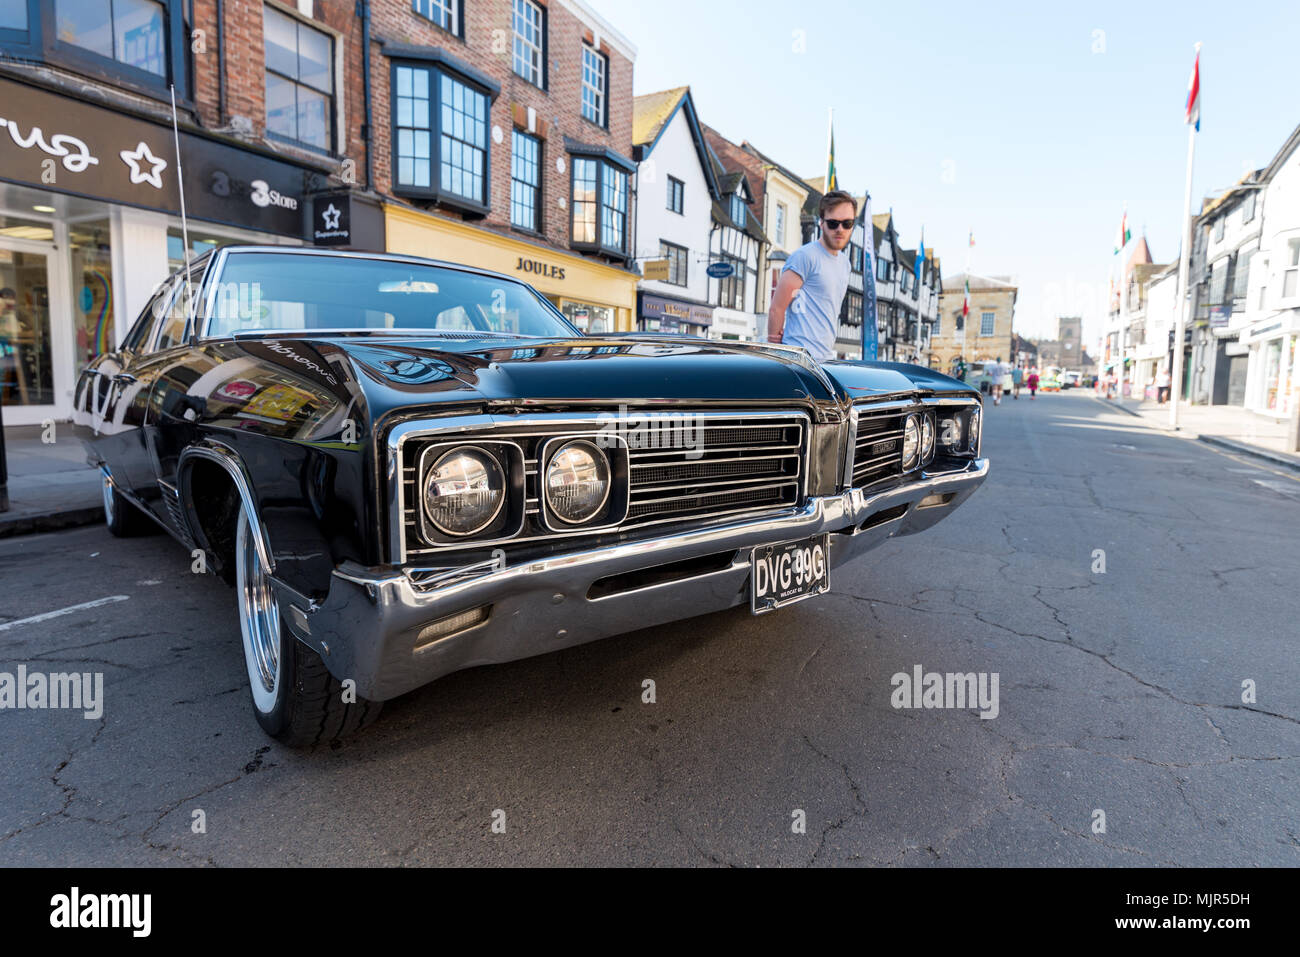 Stratford on Avon, UK, 6 May 2018. Rare, Impressive and Classic Cars on public display  of all ages on public display in the town centre streets of Stratford on Avon, Warwickshire for the 6th & 7th May 2018 Bank Holiday's Stratford Festival of Motoring. Credit: 79Photography/Alamy Live News Stock Photo